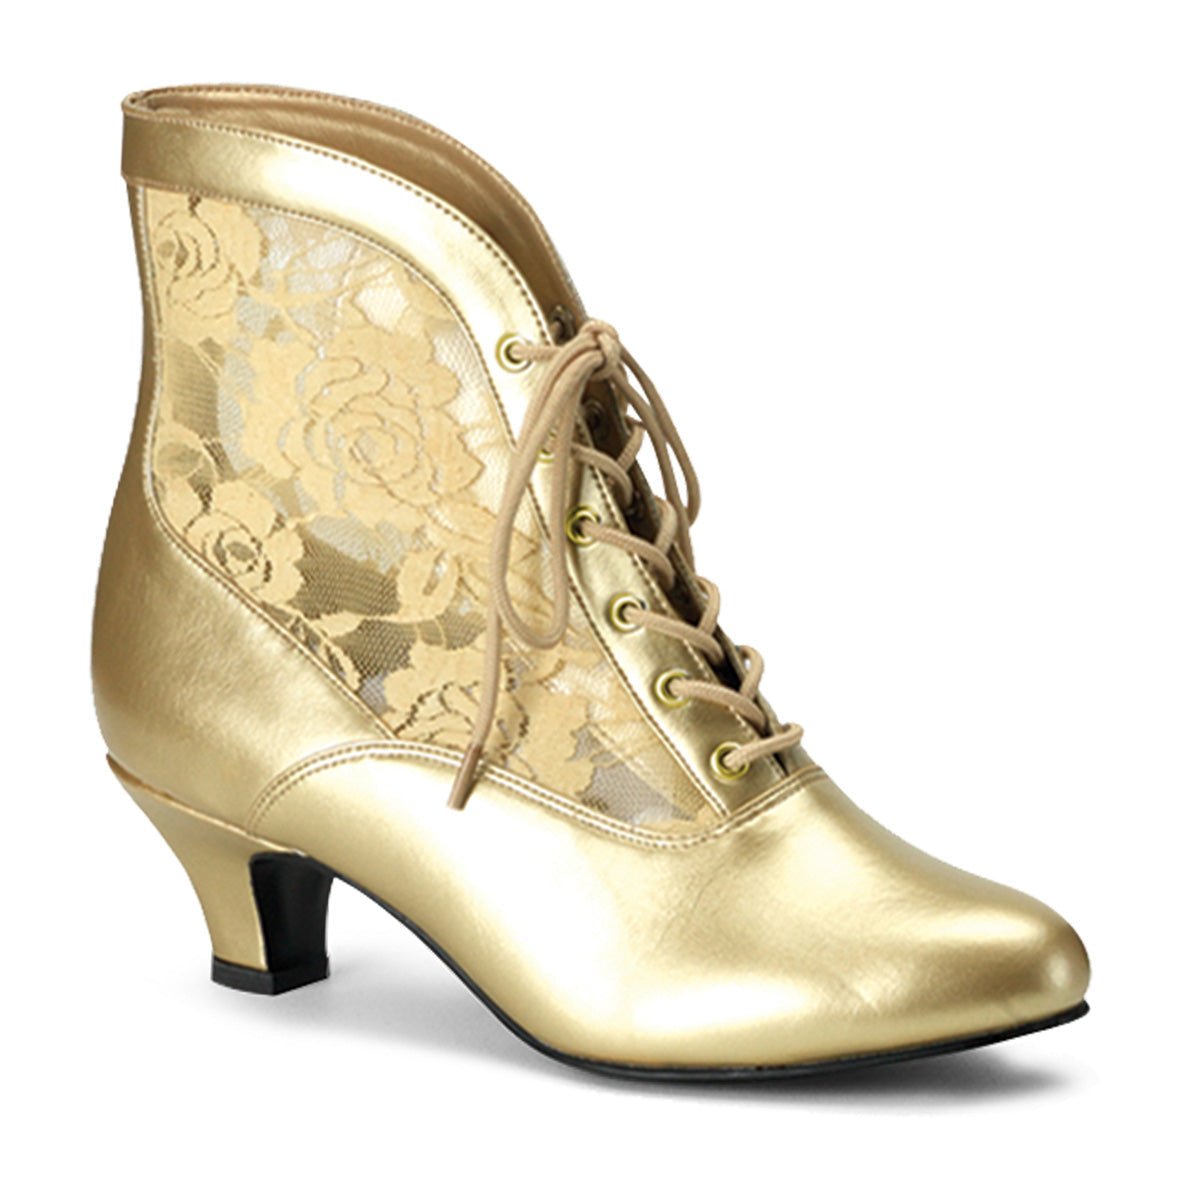 Clearance Funtasma Dame 05 Gold Size 4UK/7USA - From Clearance Sold By Alternative Footwear